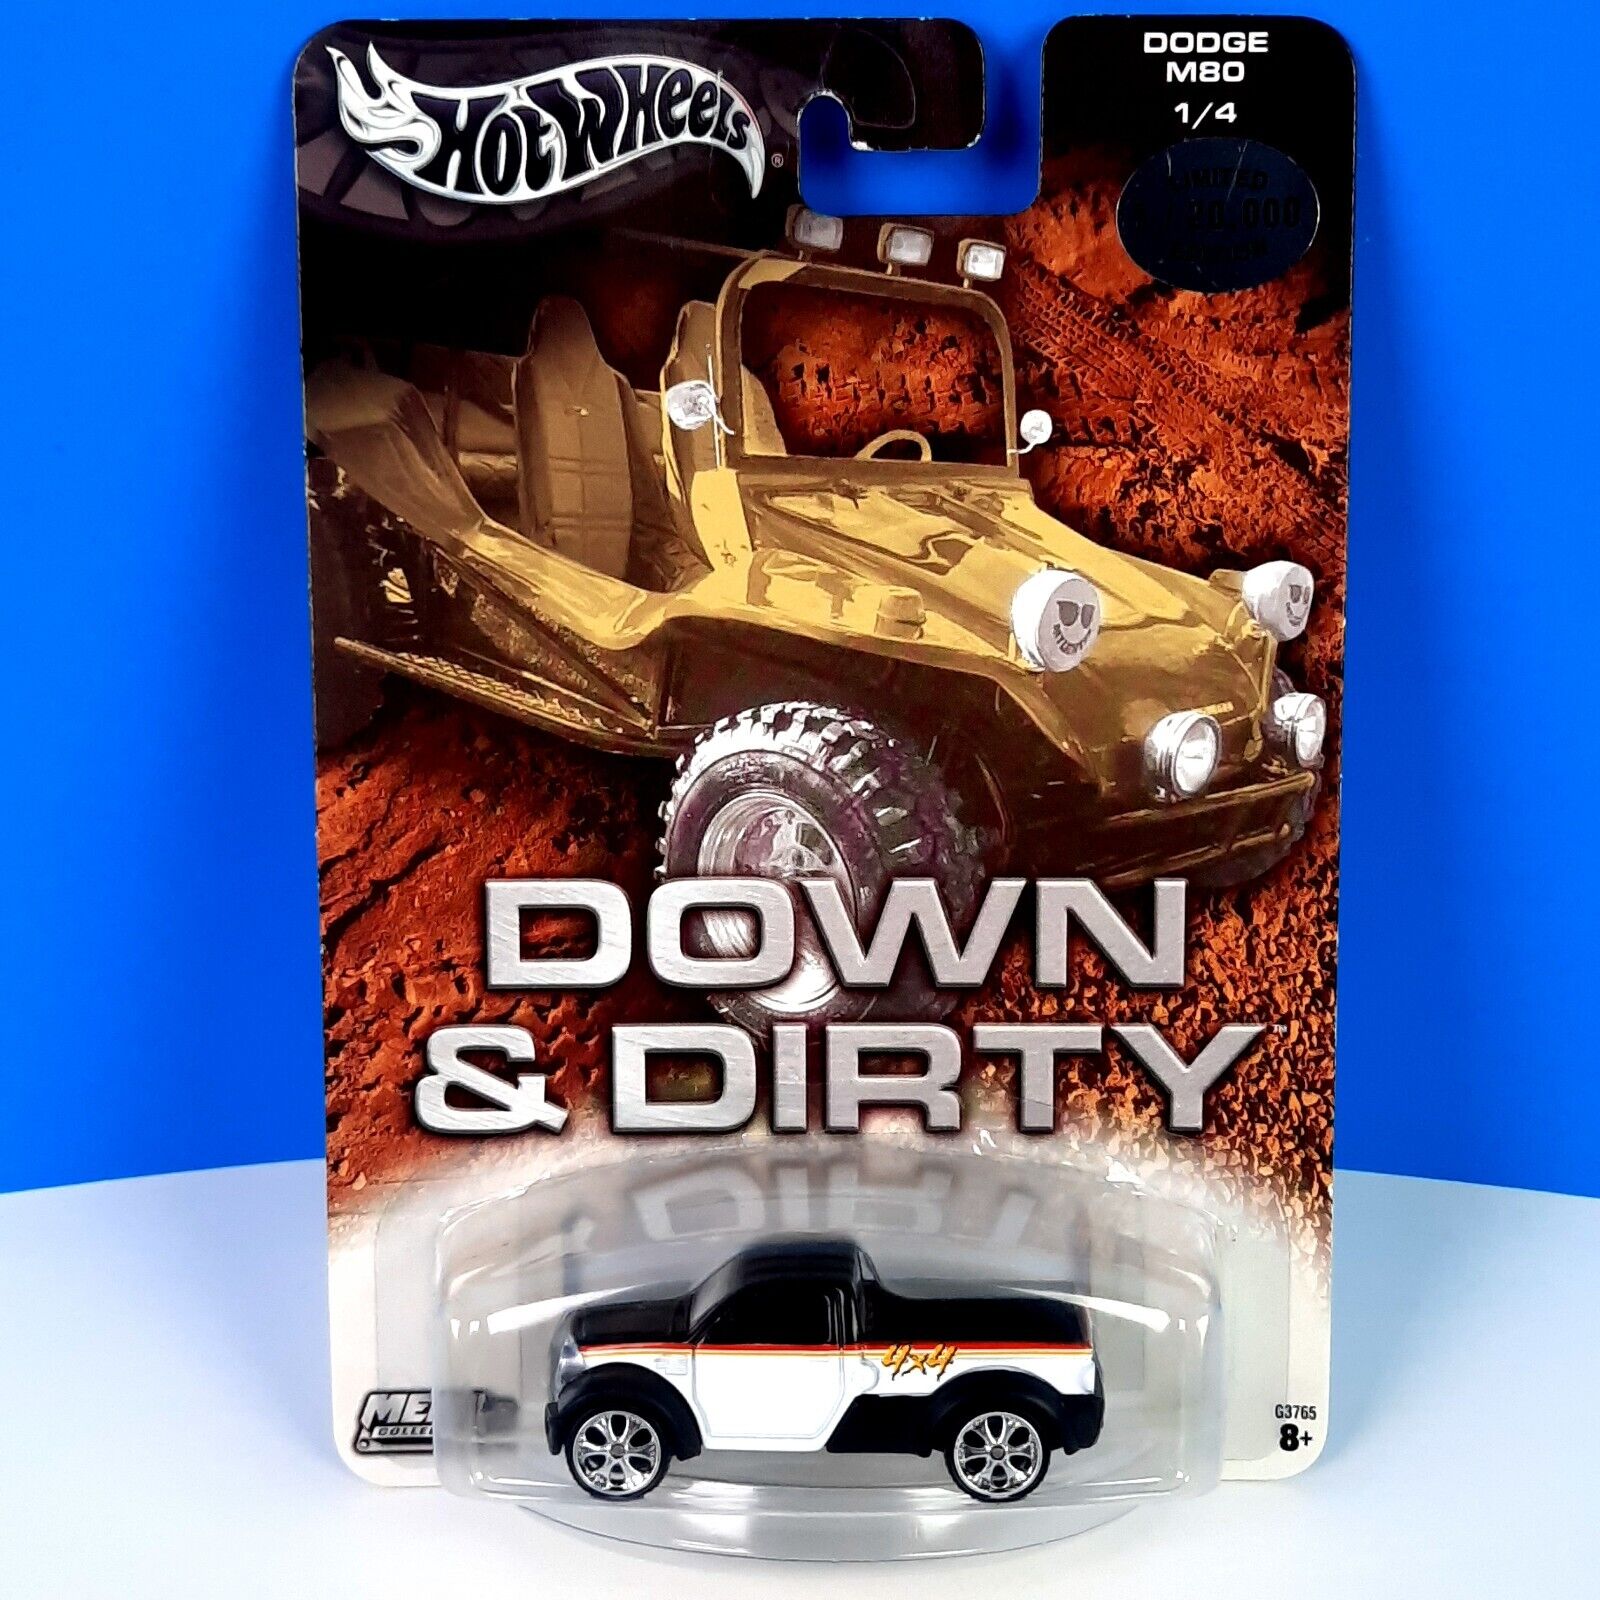 Hot Wheels Dodge M80 White Down & Dirty 2004  Tear Drop Blings  Limited Edition